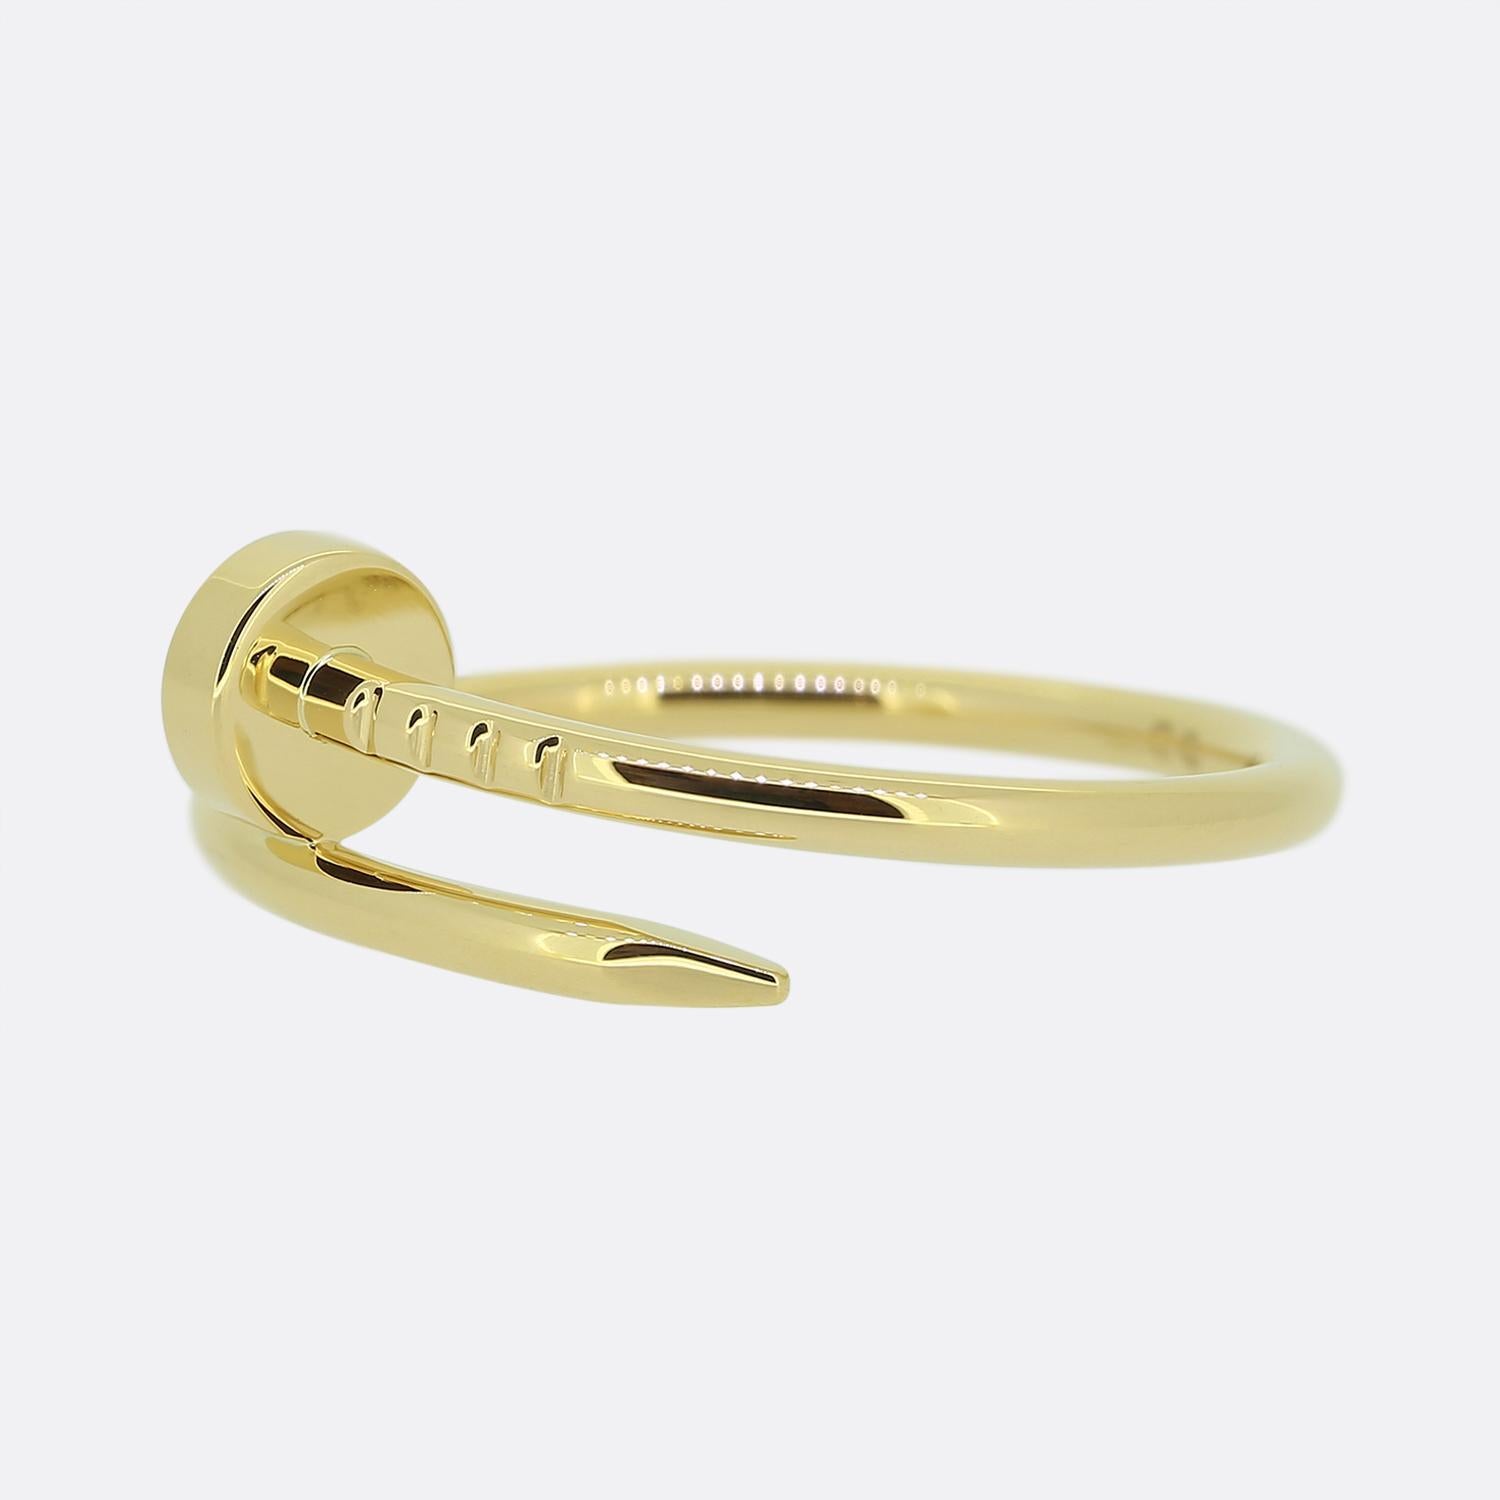 Here we have an excellently crafted 18ct yellow gold ring from the world renowned jewellery house of Cartier. This piece forms part of their iconic 'Juste un Clou' collection and showcases a wrap-around nail design. This is the small/thin model with